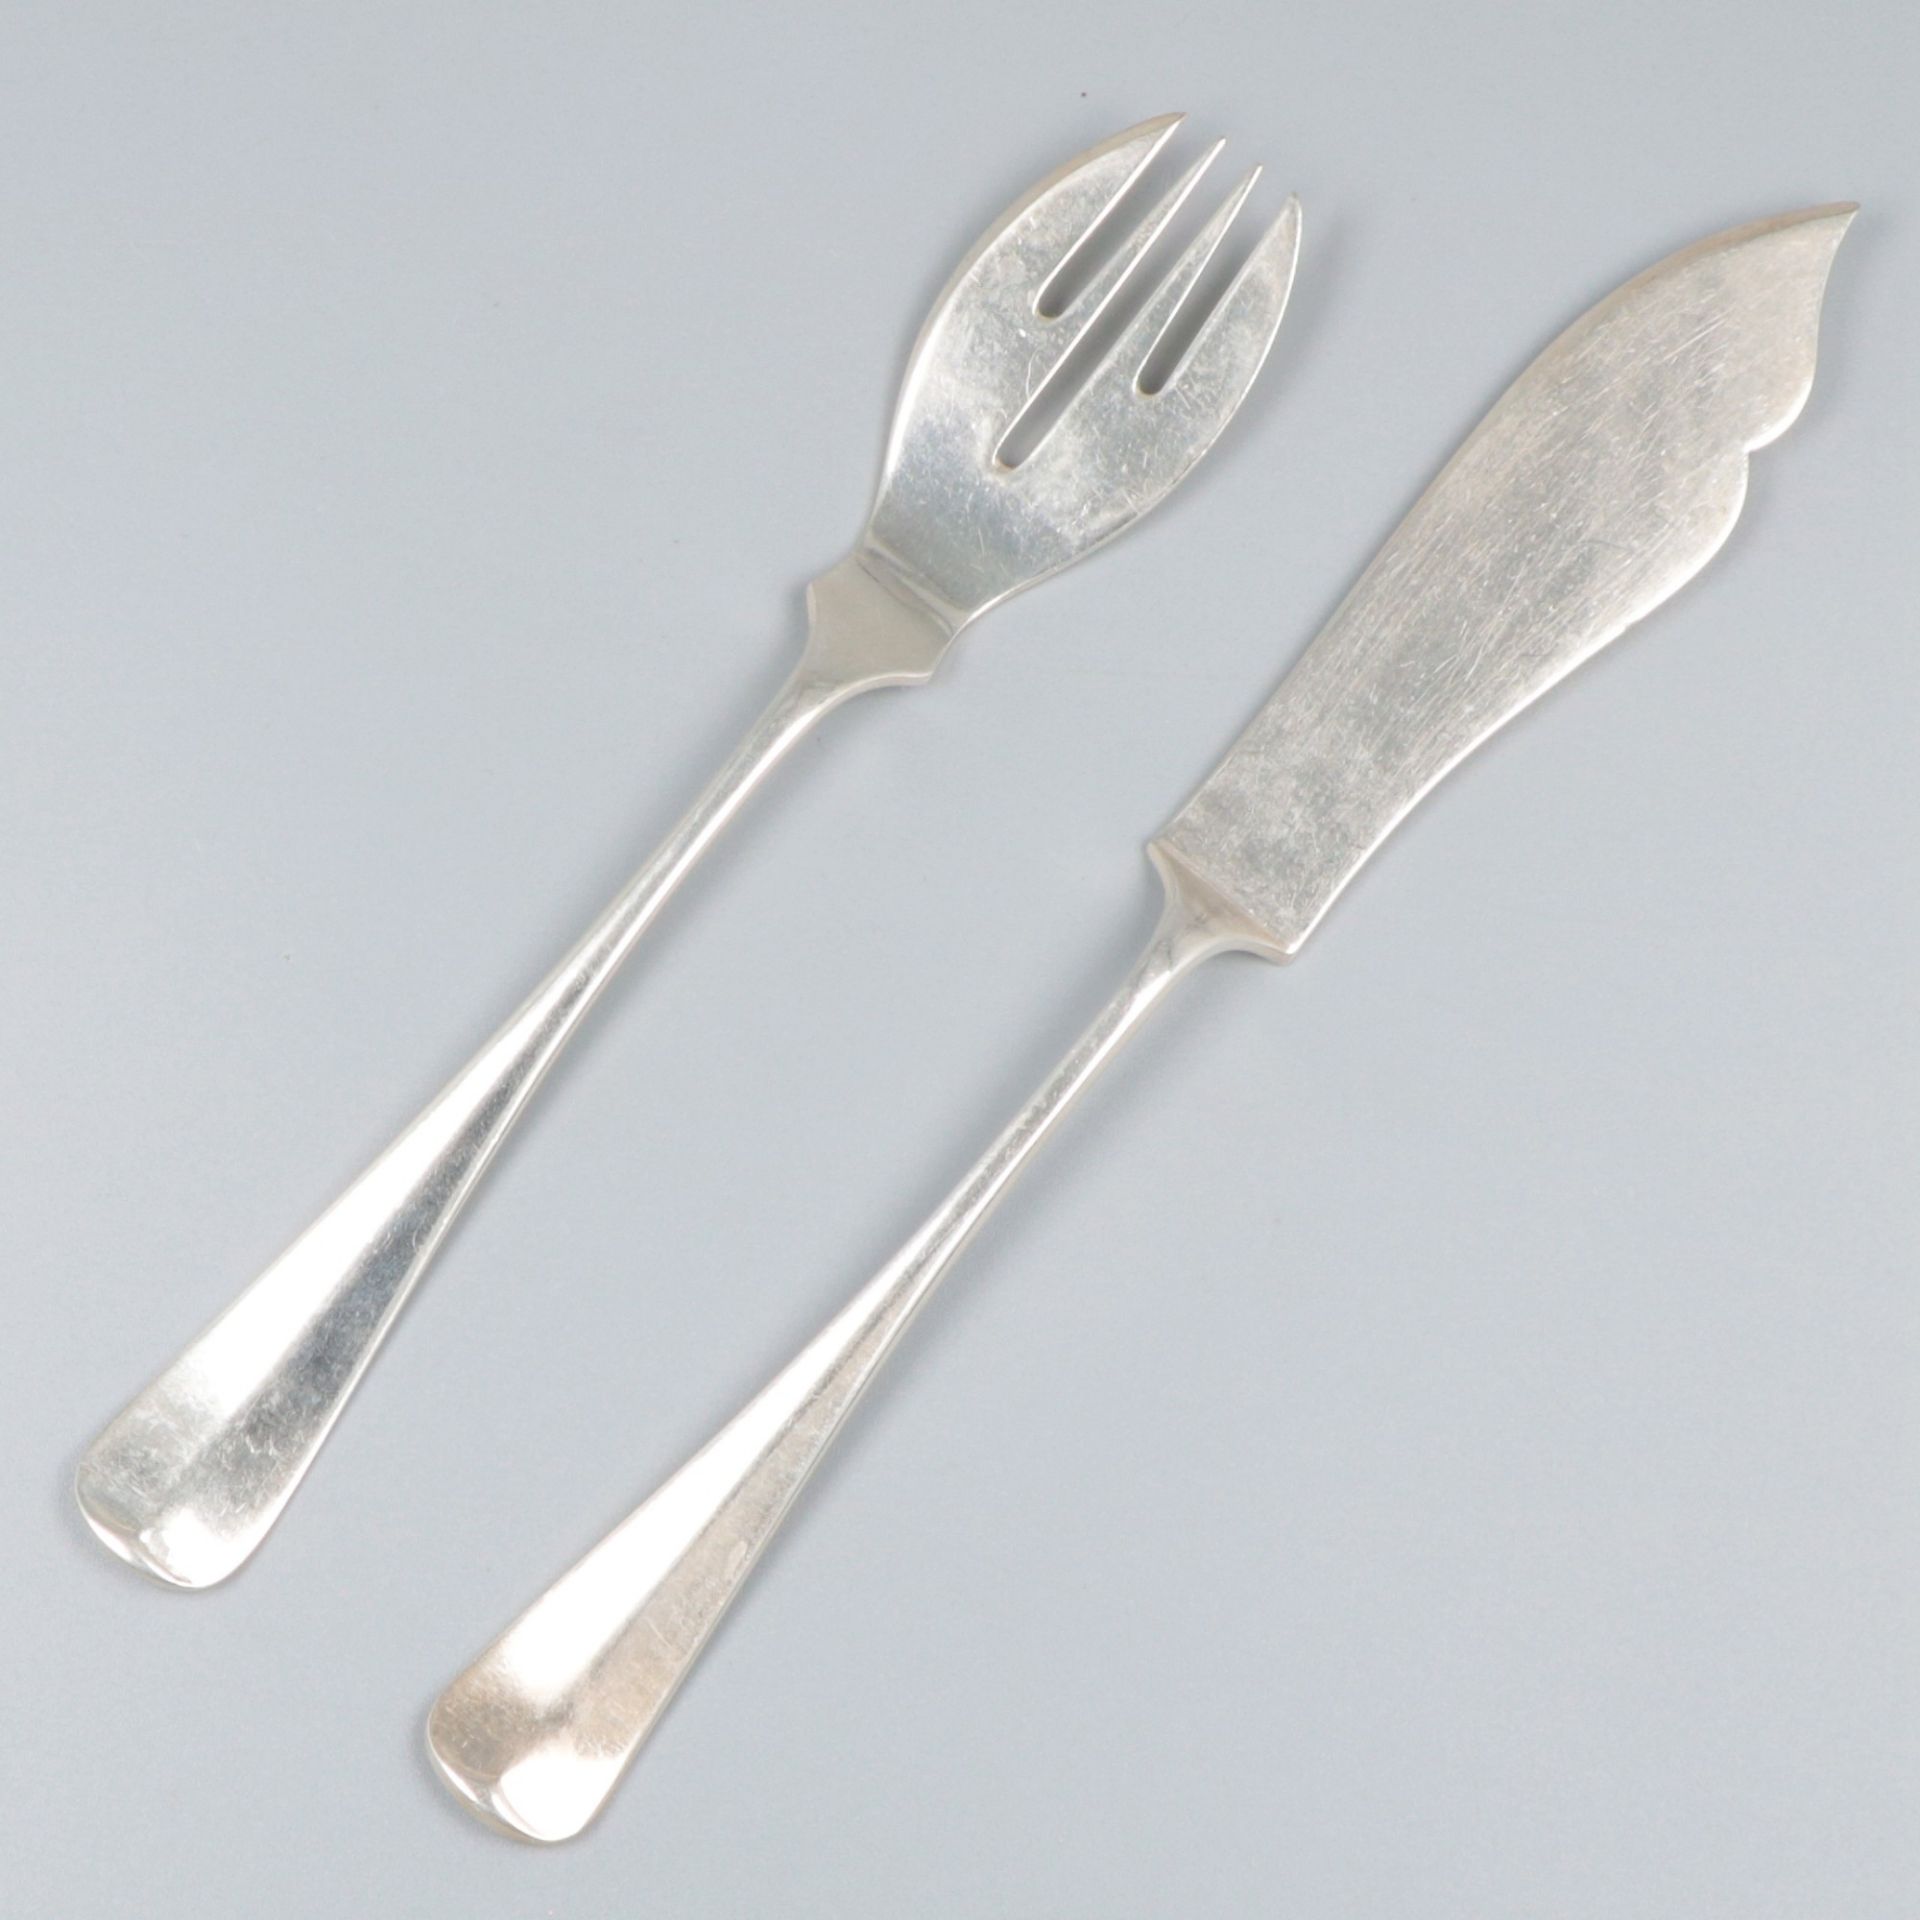 12-piece fish cutlery set "Haags Lofje", silver. - Image 2 of 6